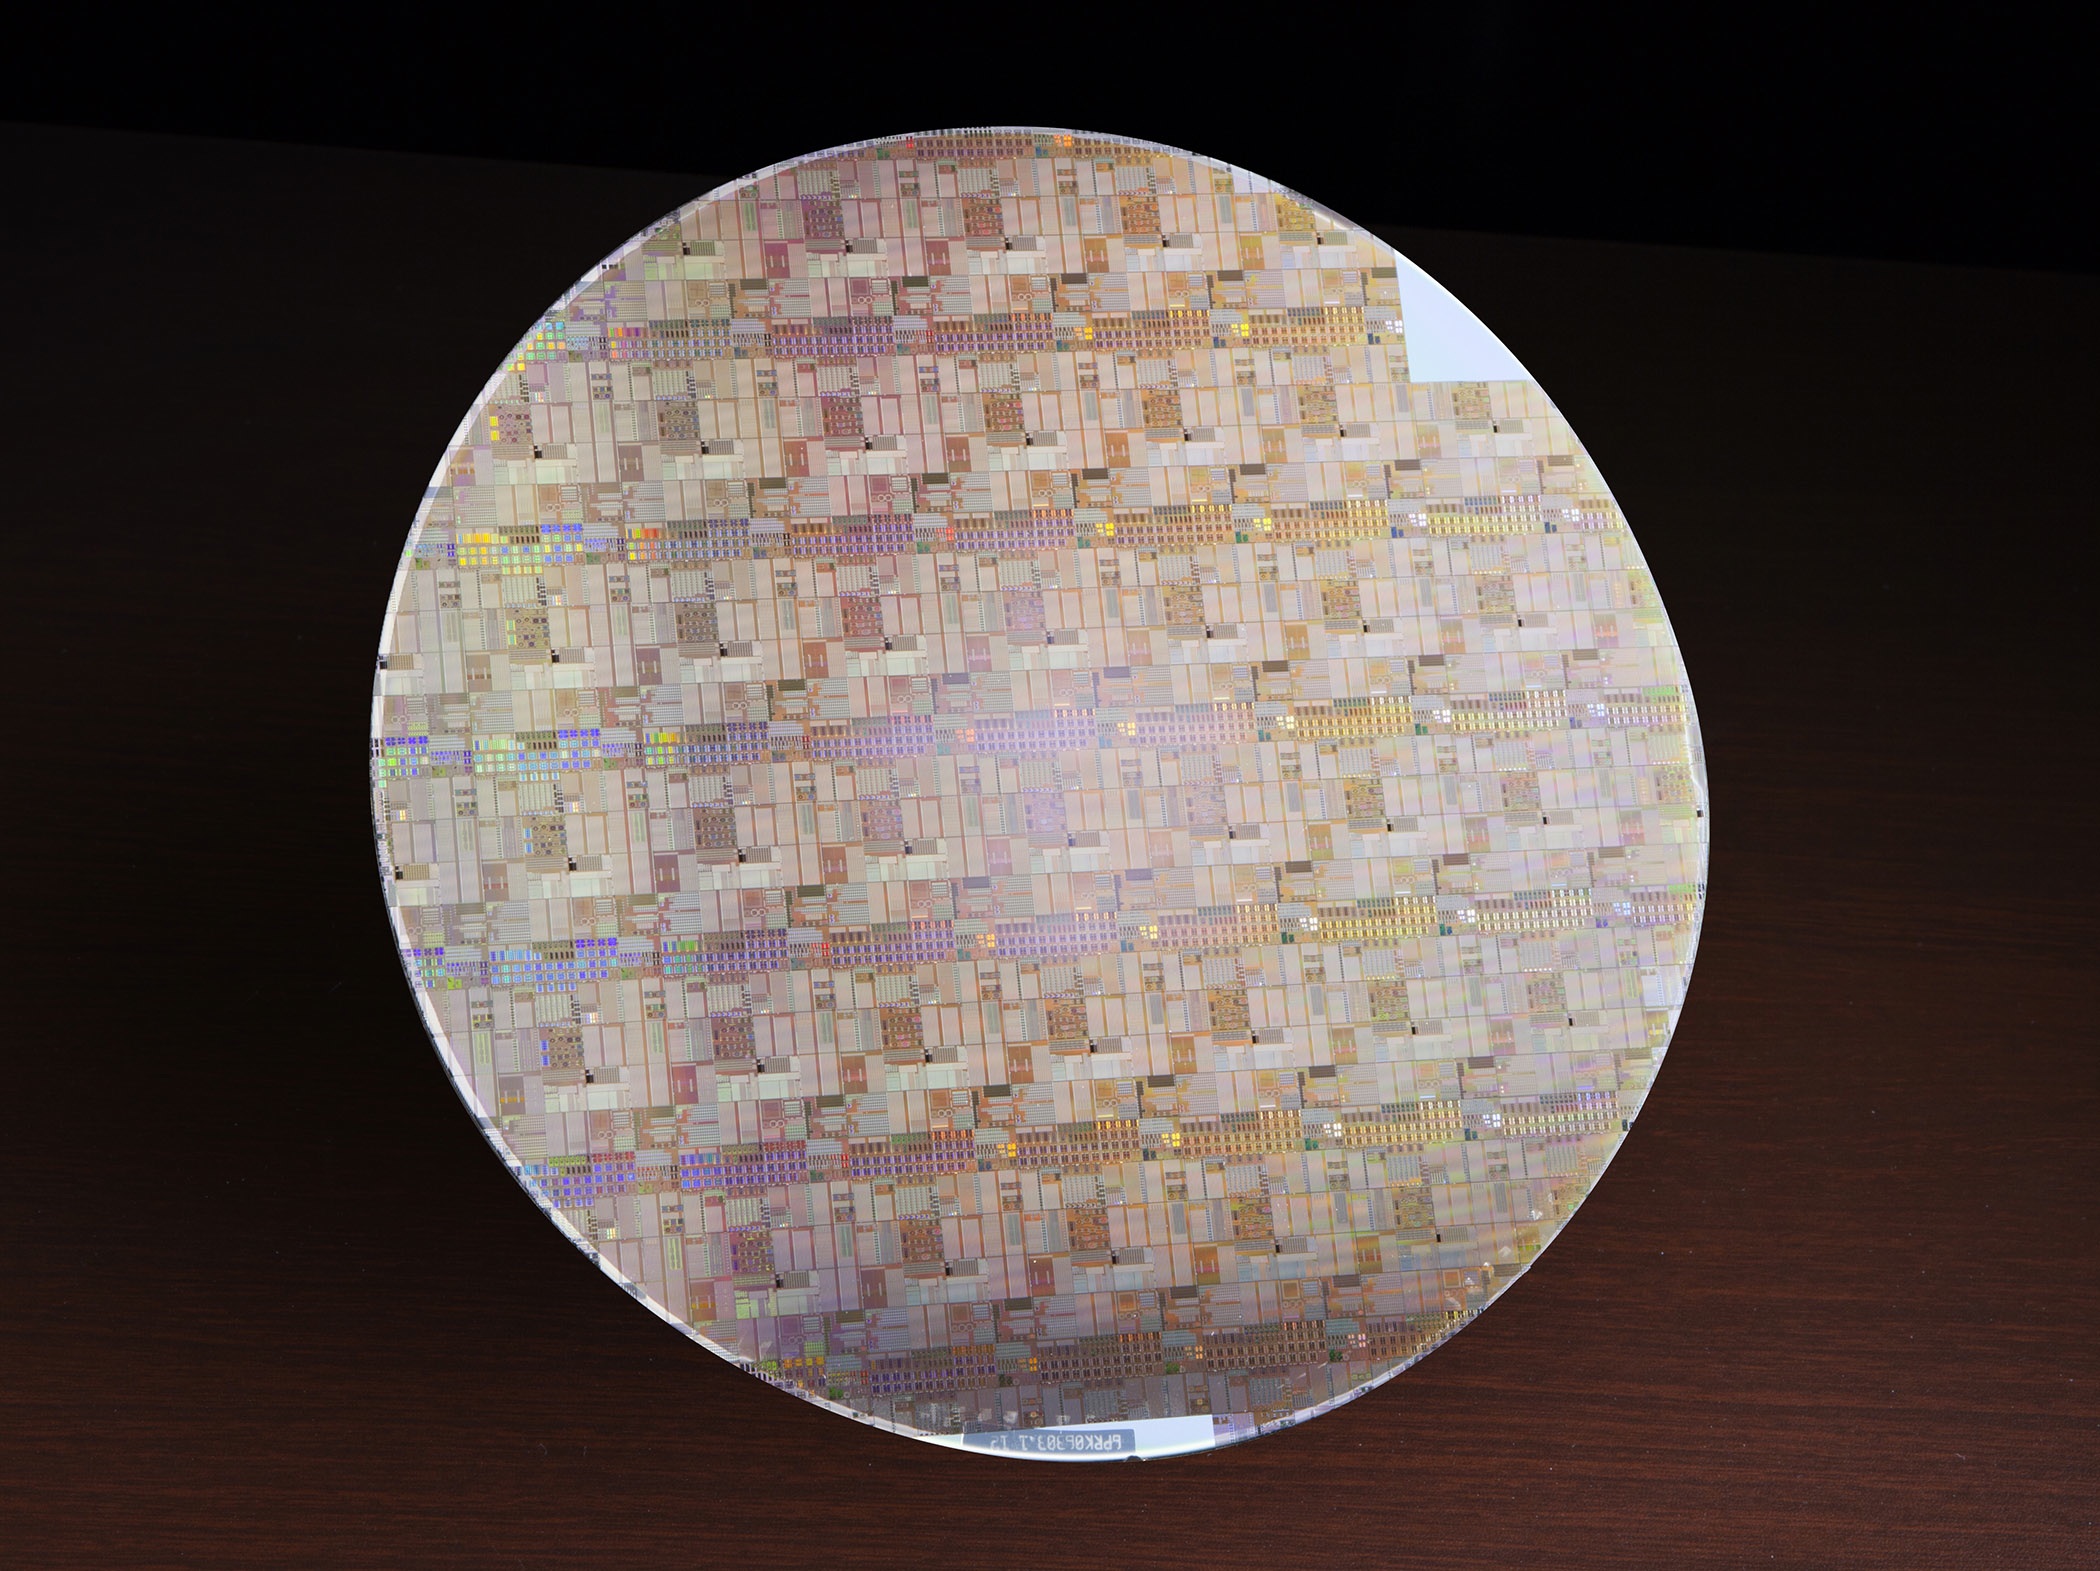 Figure 2: An UltraCMOS 10 wafer. Peregrine worked with Globalfoundries and Soitec to develop this CMOS process that can rival GaAs for RF power amplifiers.